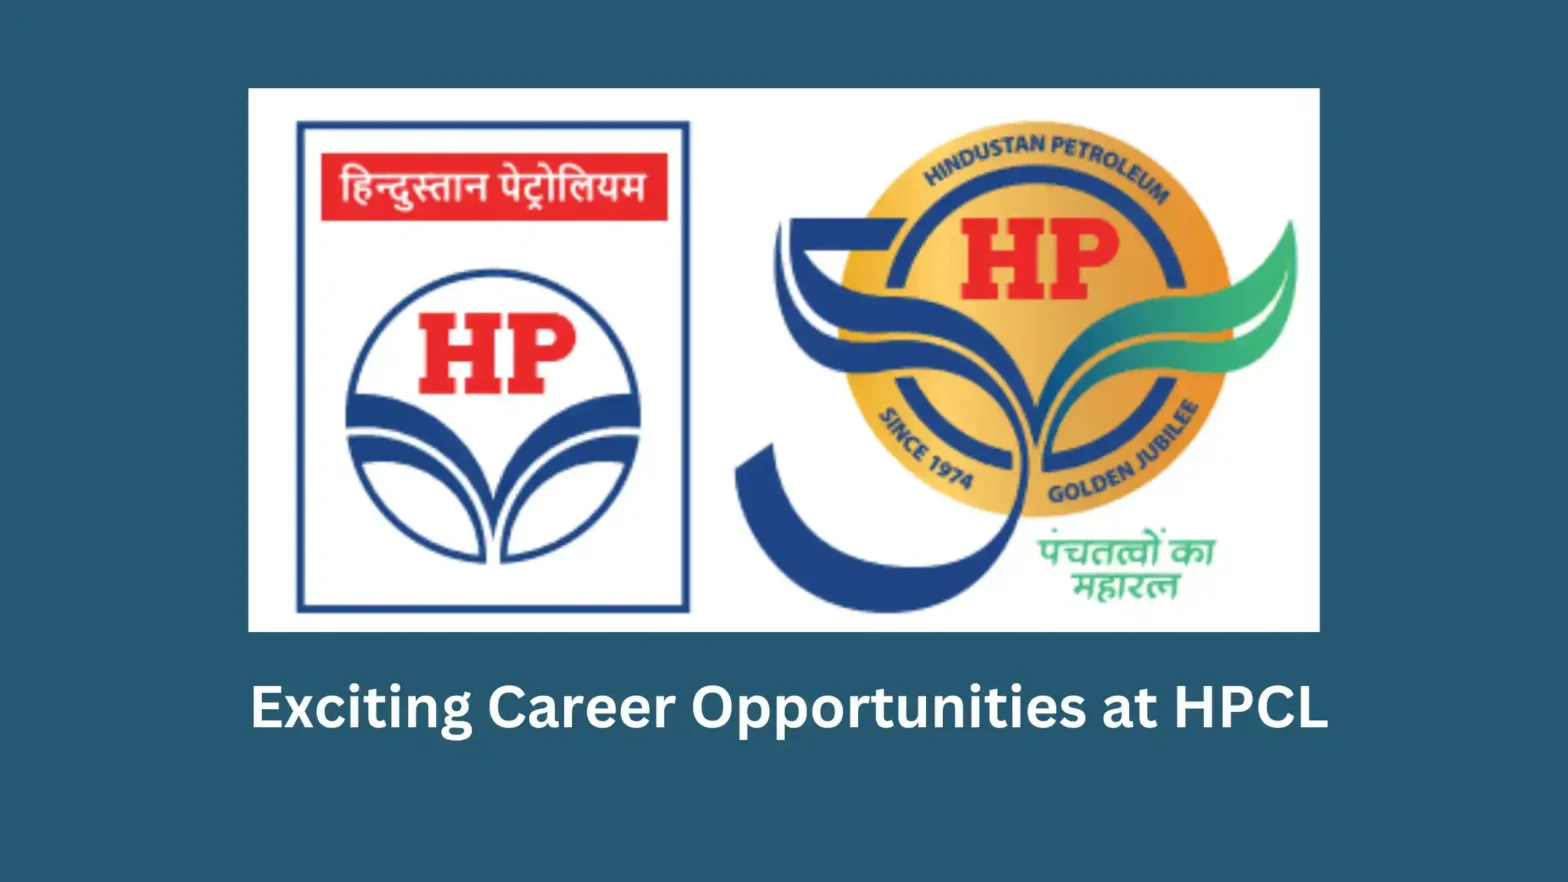 Exciting Career Opportunities at HPCL